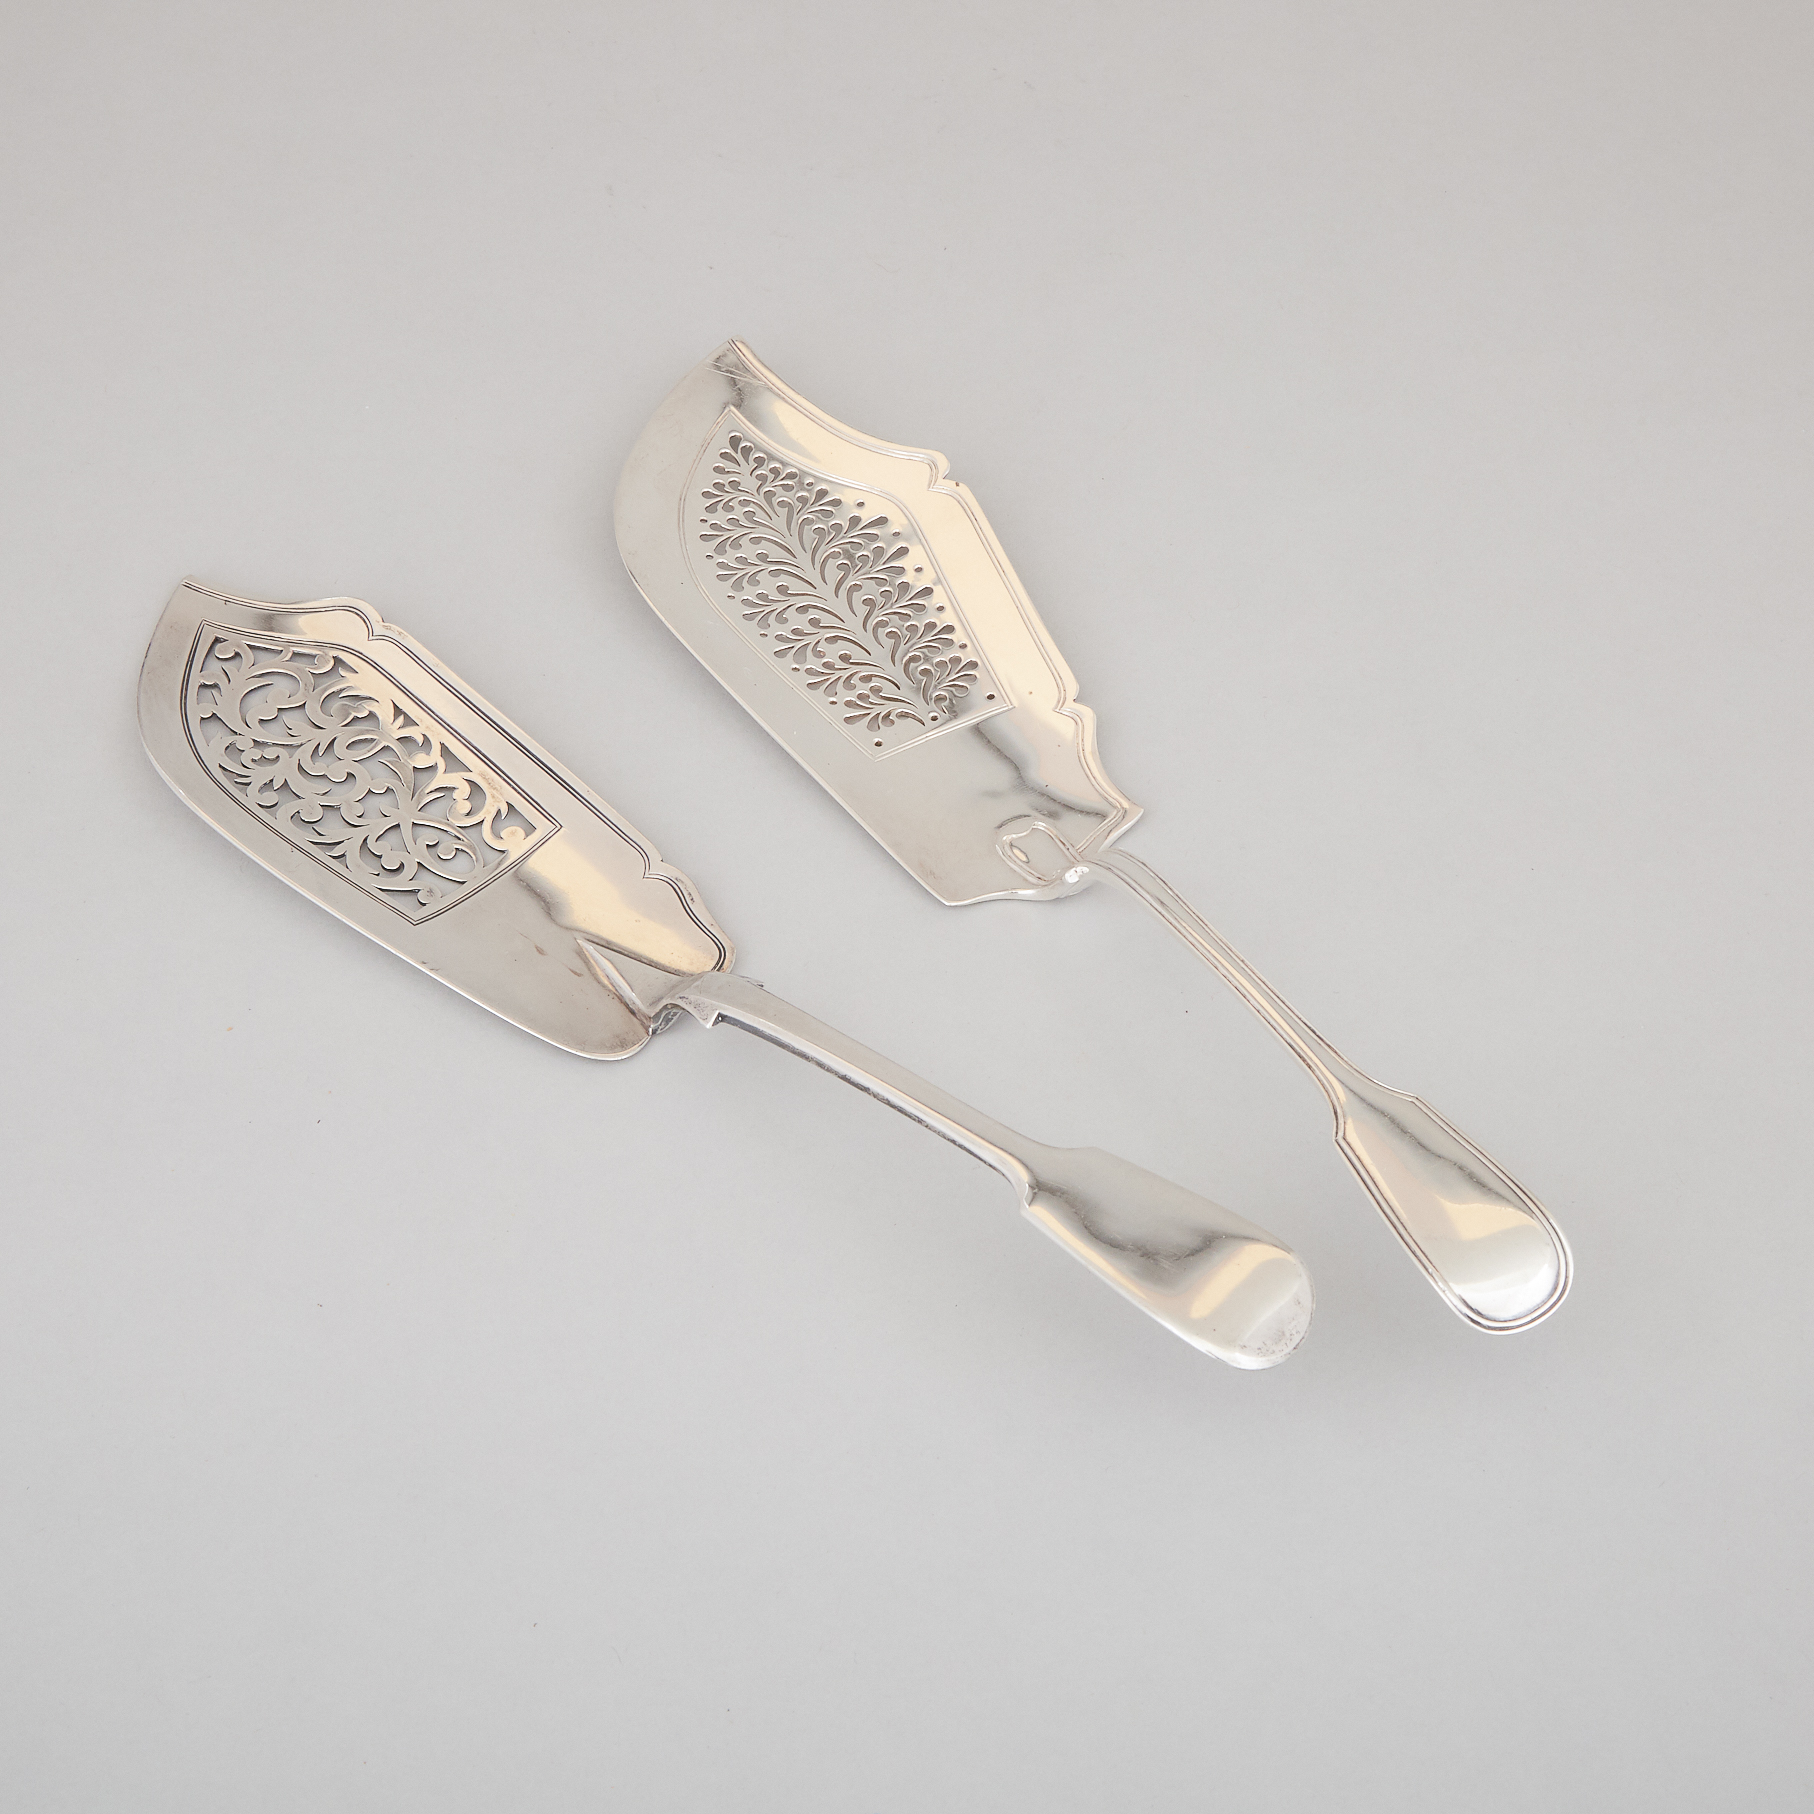 William IV Silver Fiddle and Thread Pattern Fish Server, John Whiting, London, 1835, and a Victorian Fiddle Pattern Slice, John & Henry Lias, 1841